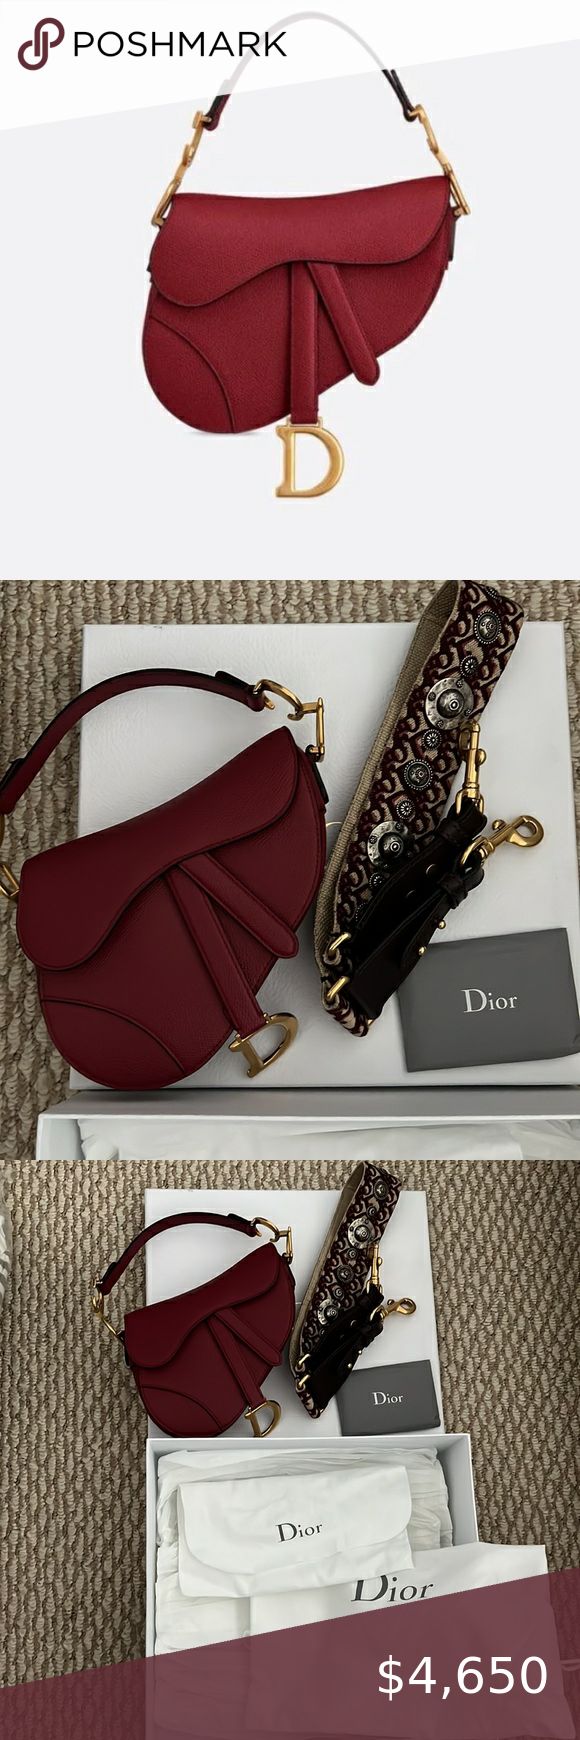 💯 auth Dior mini saddle red grained calfskin & guitar strap excellent condition Guitar, Handbags, Dior, Dior Handbags, Guitar Strap, Saddle, Calf Skin, Plus Fashion, Red